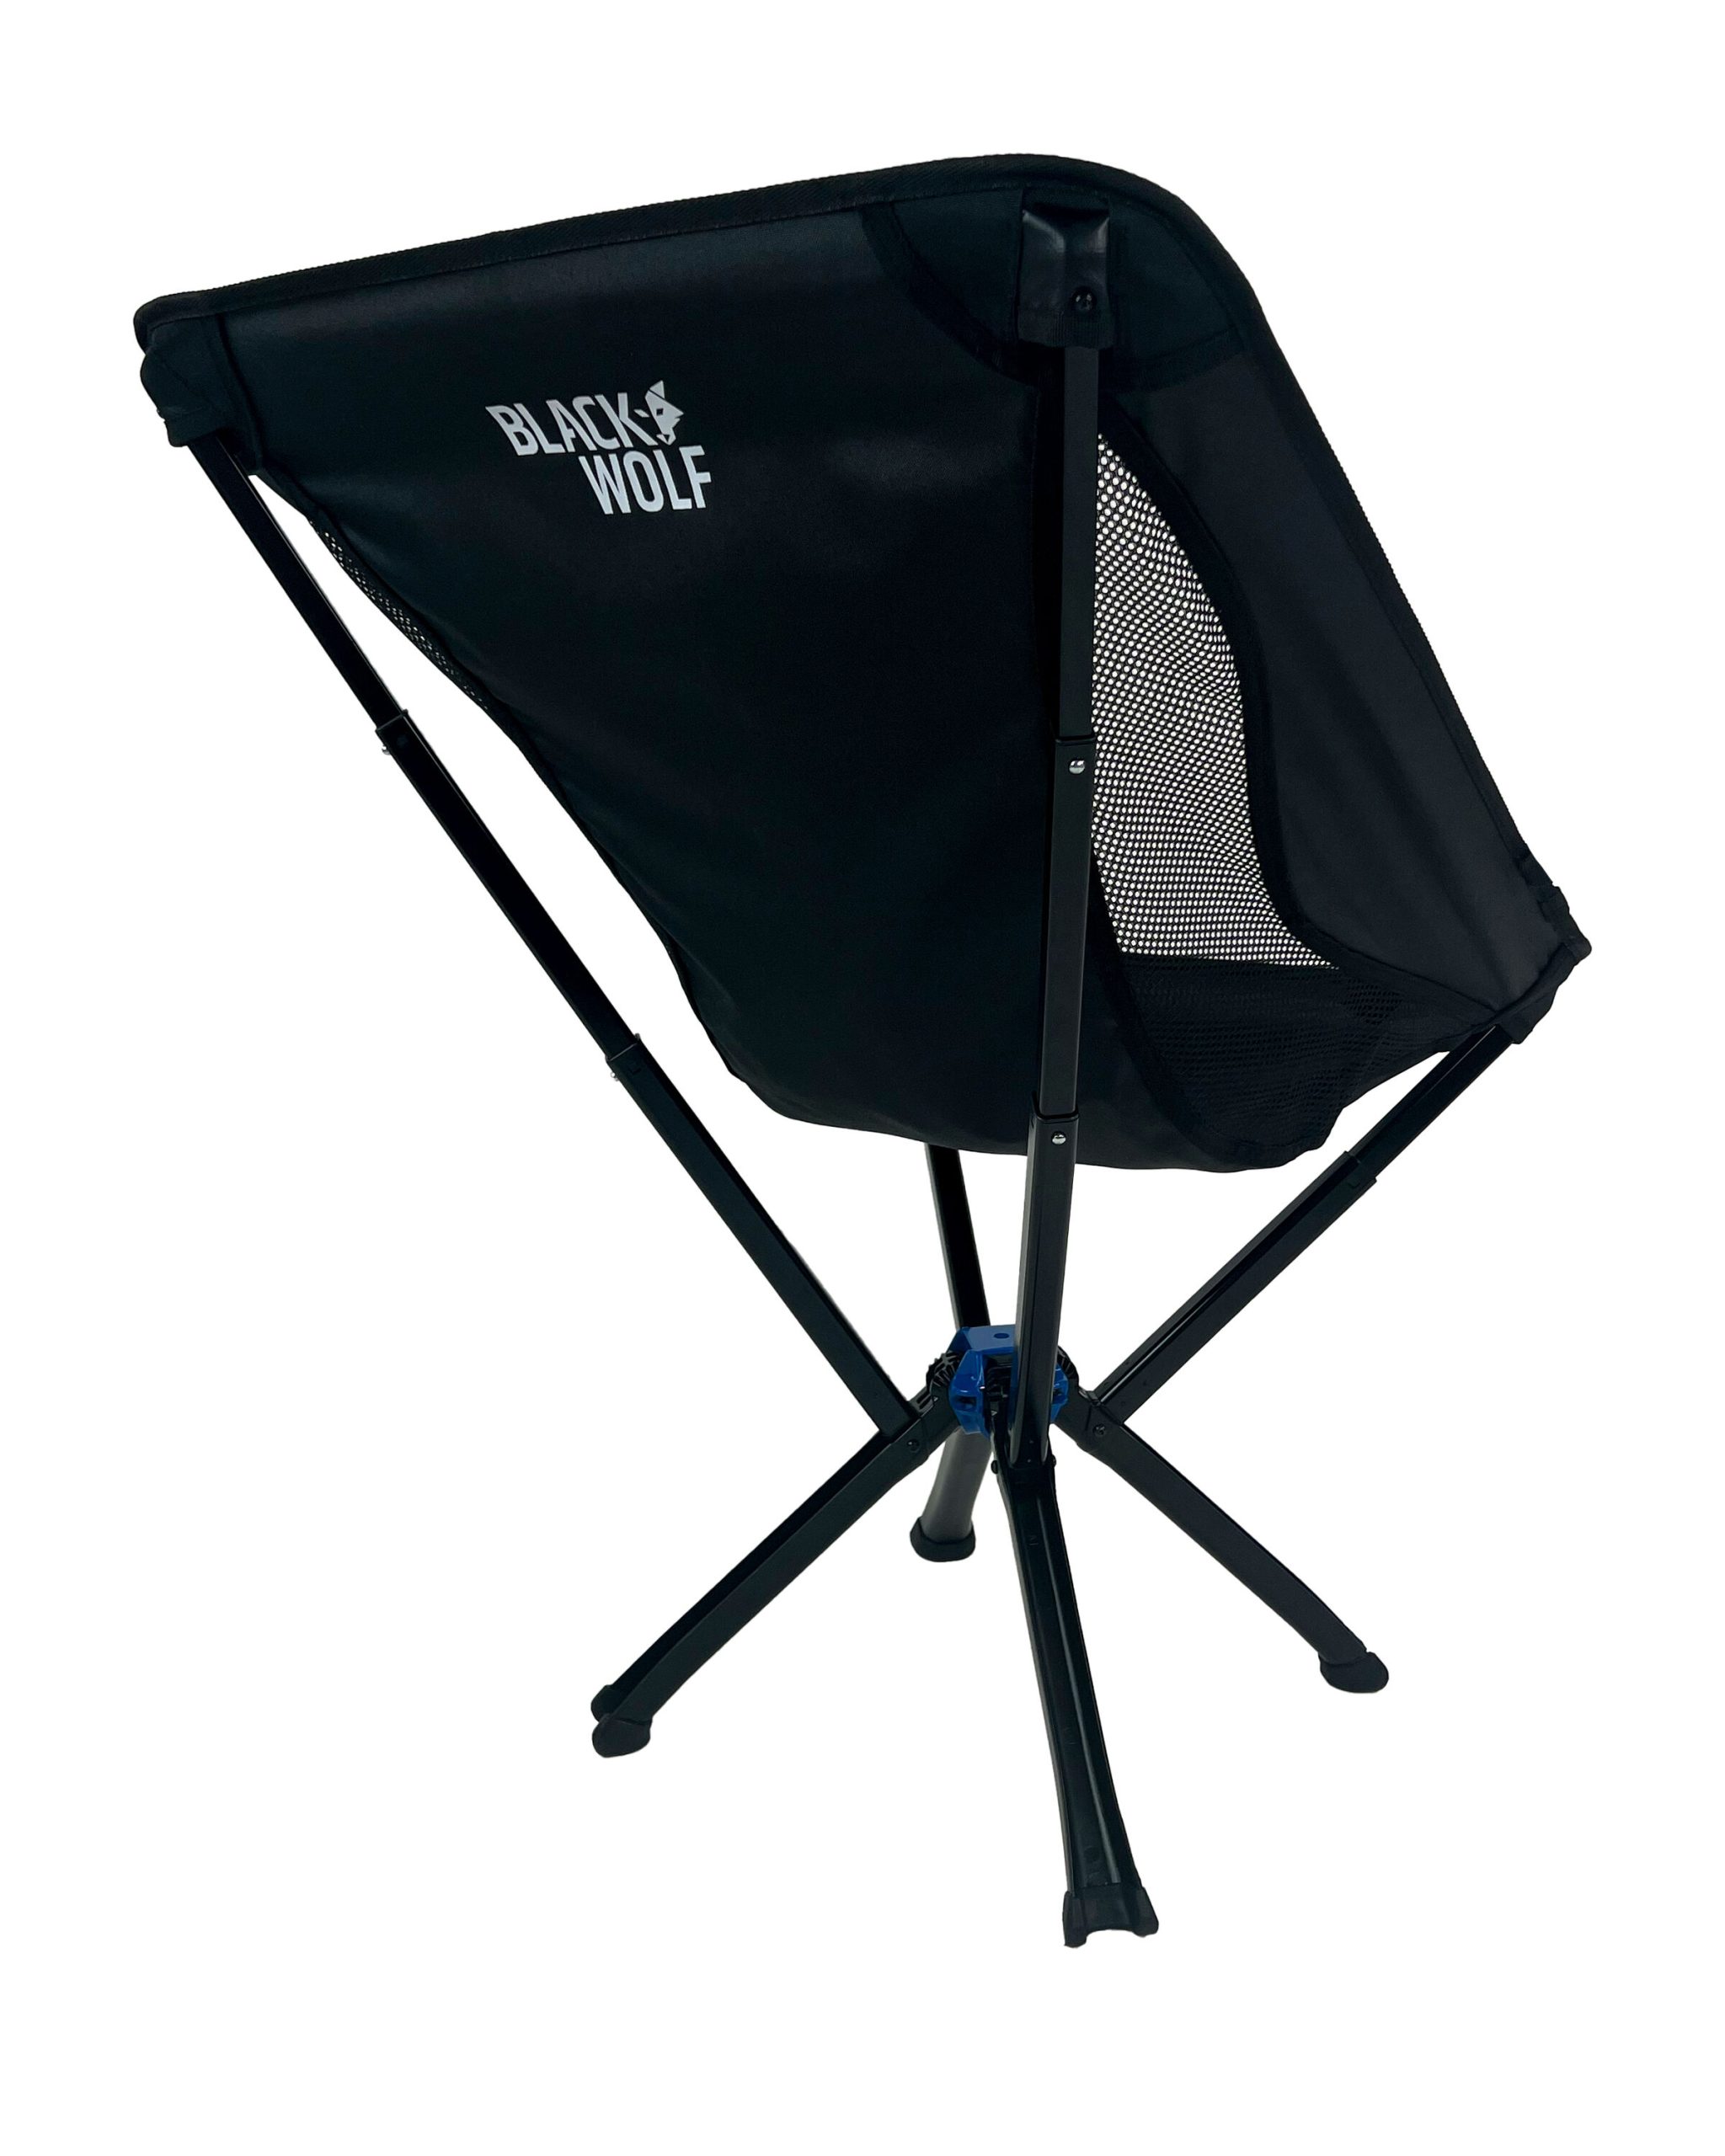 Blackwolf Quick Fold Camp Chair Small Compact (8)